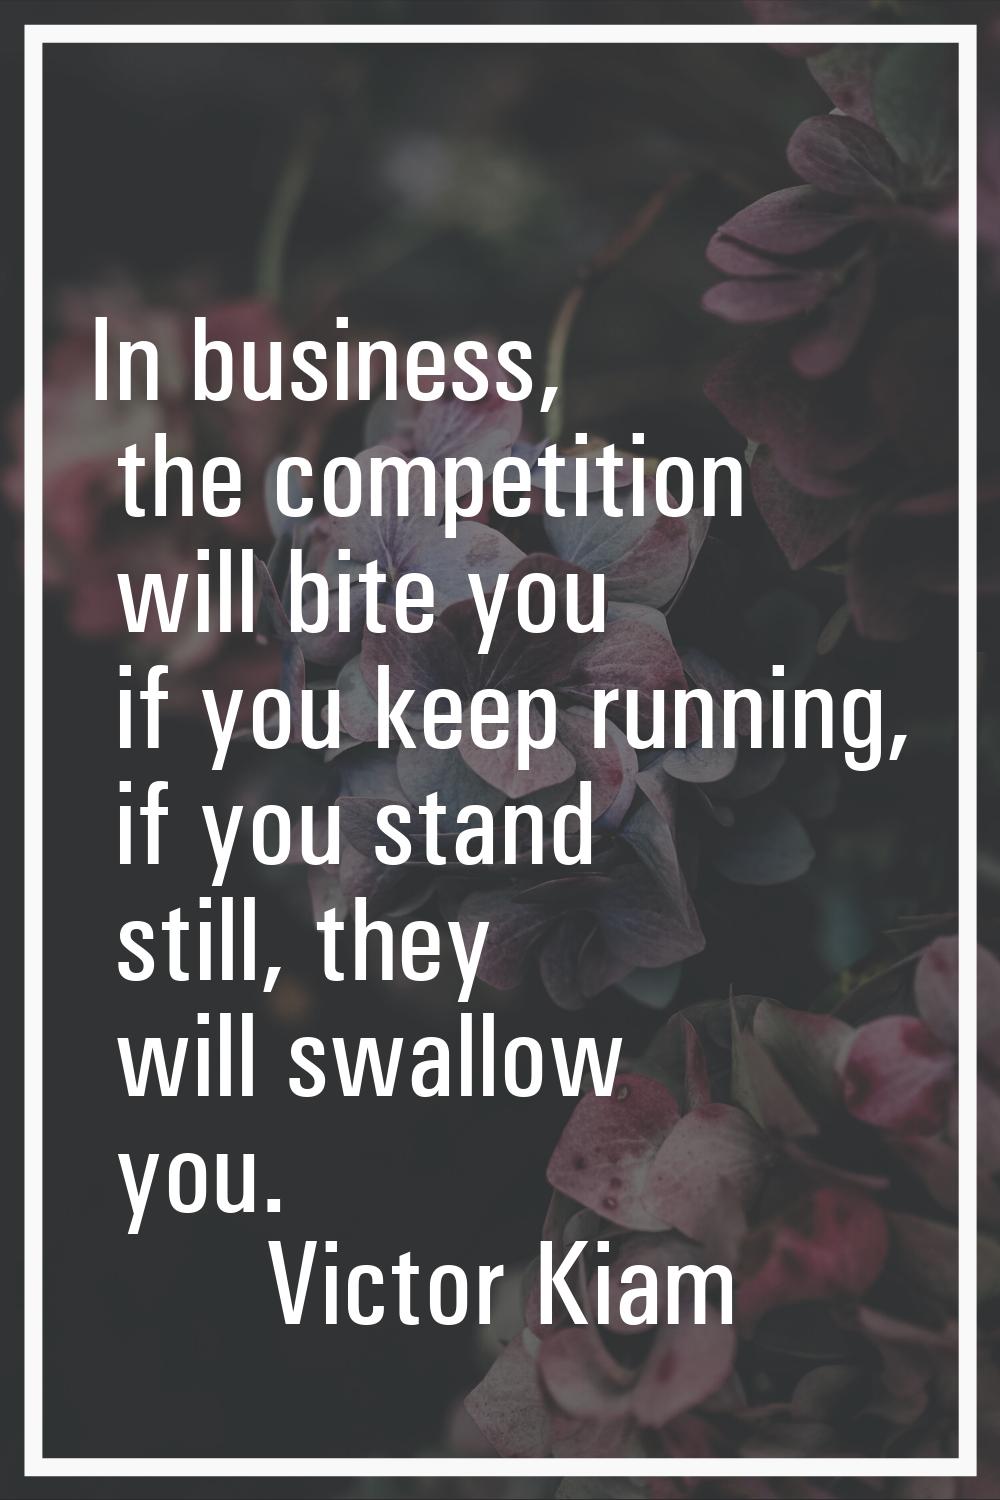 In business, the competition will bite you if you keep running, if you stand still, they will swall